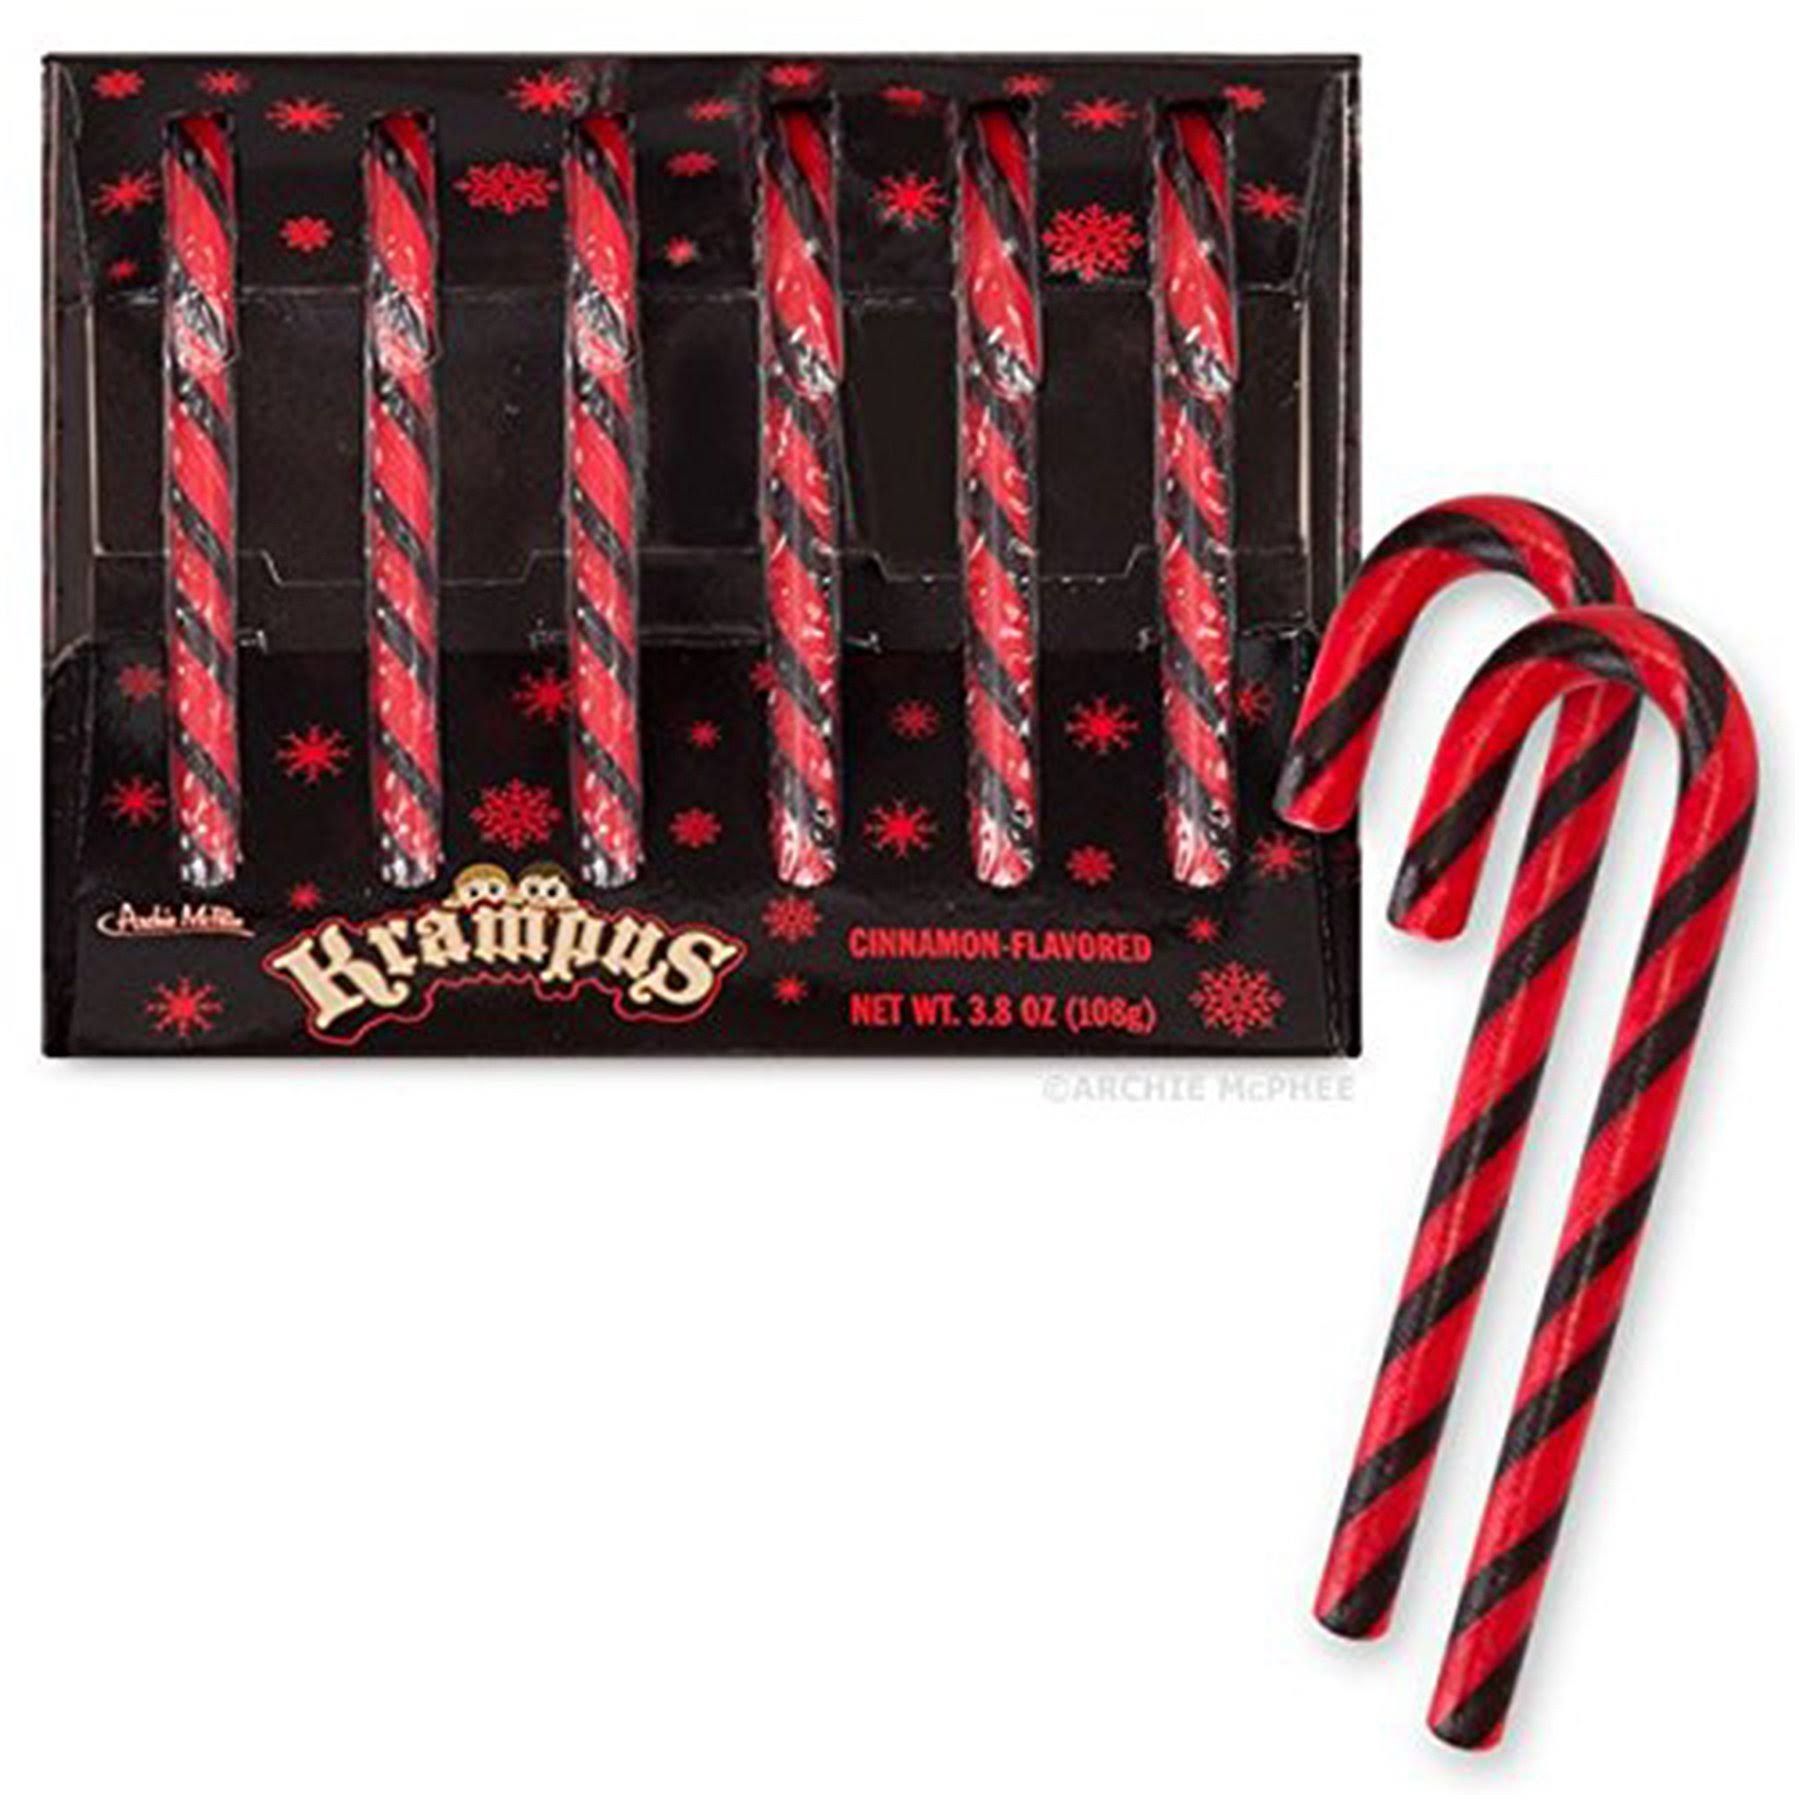 Krampus Candy Canes - Box of 6